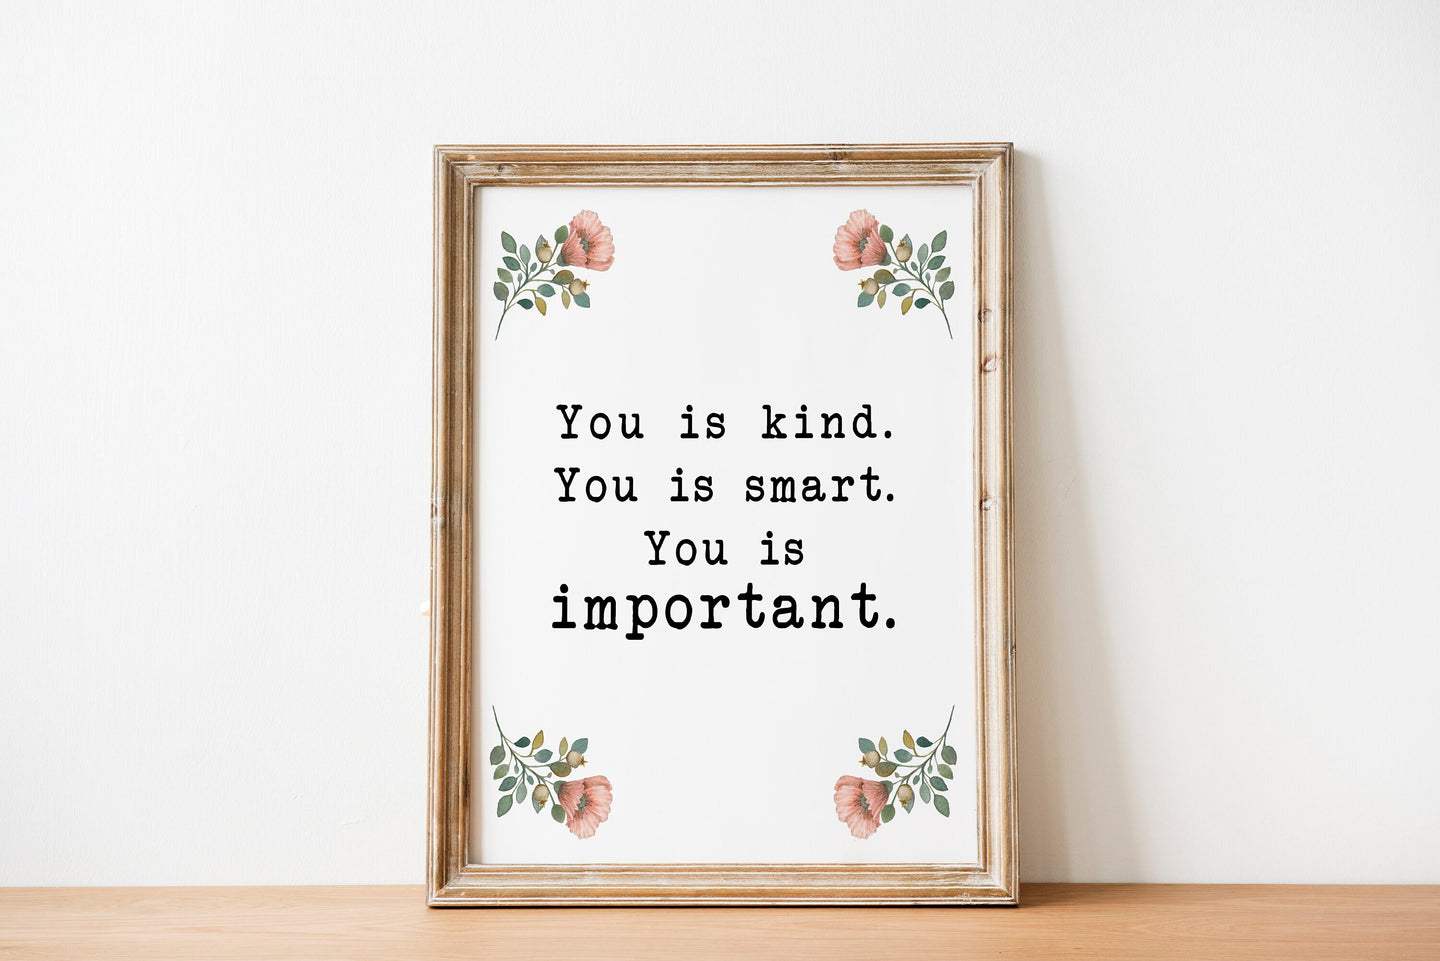 You is kind you is smart you is important - The Help book poster Movie Quote, Black and White Art Print for Home Decor, Unframed print